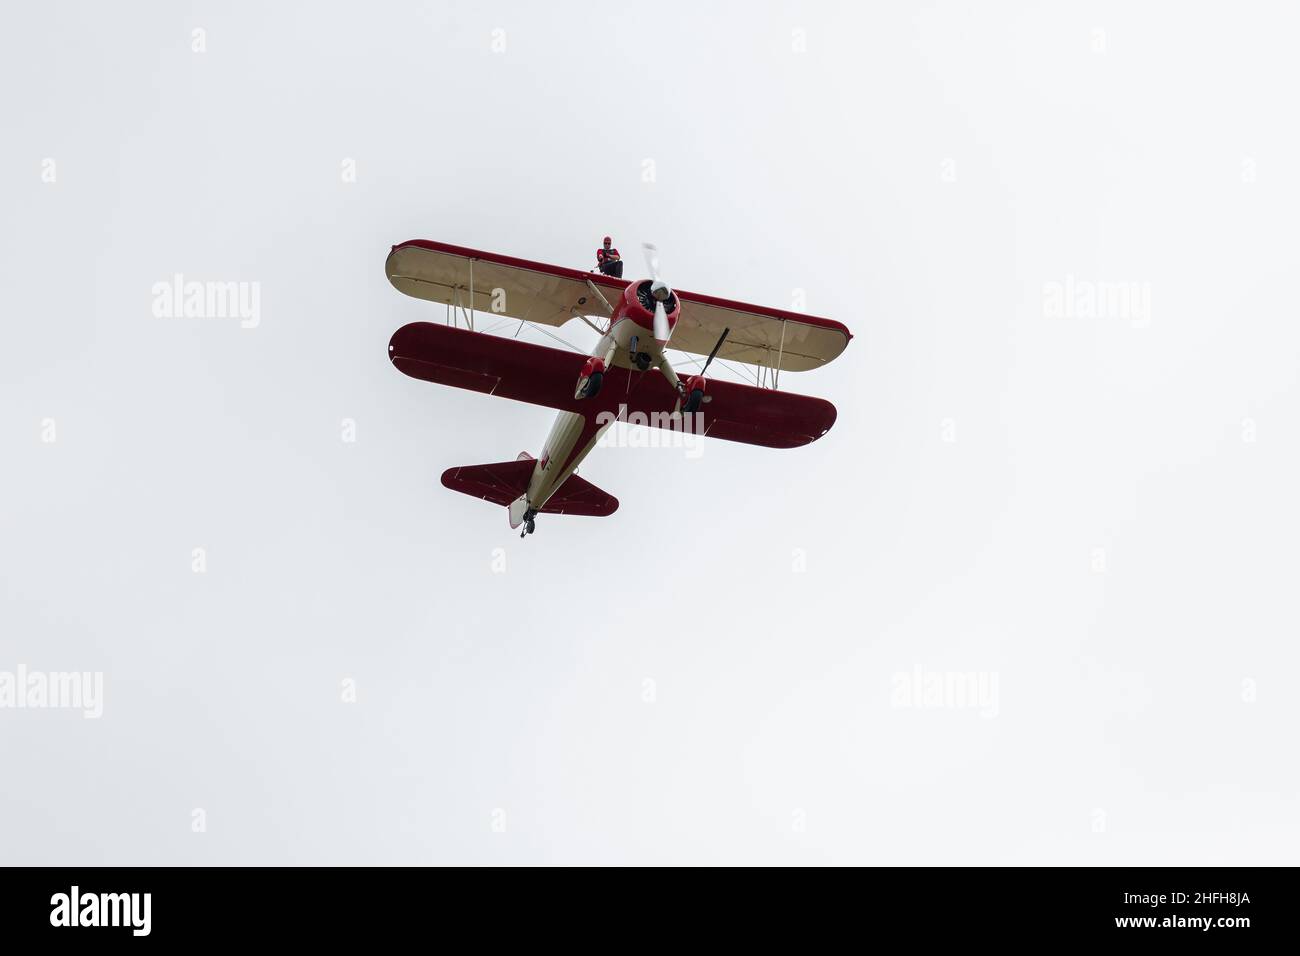 Aerobatics combined with a wingwalk on a biplane Stock Photo